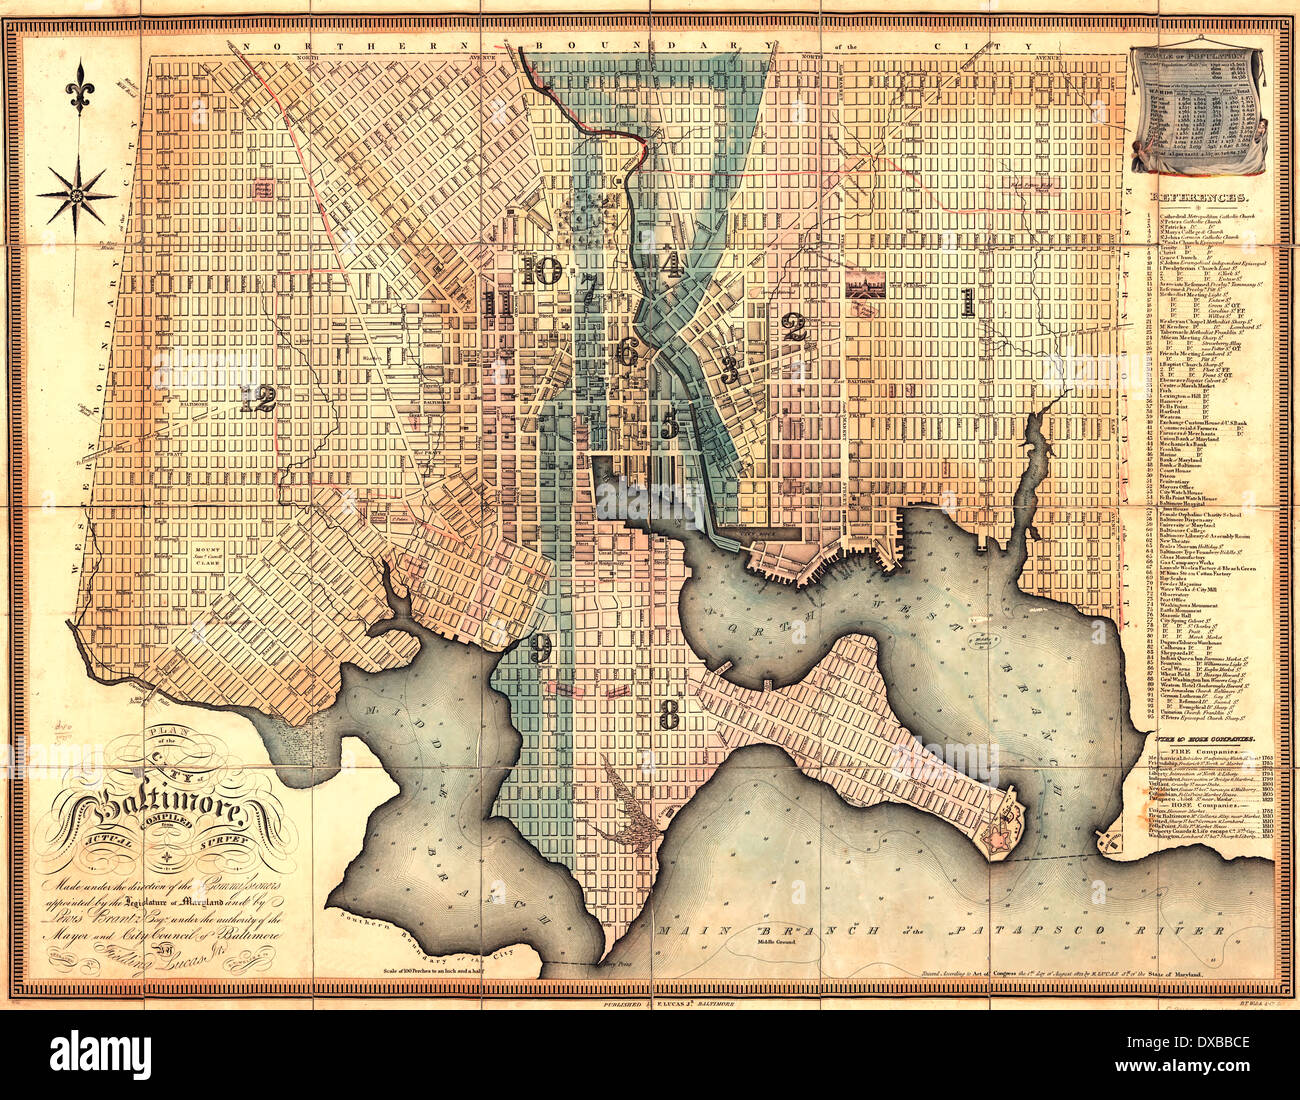 Plan of the city of Baltimore, Maryland 1822 Stock Photo